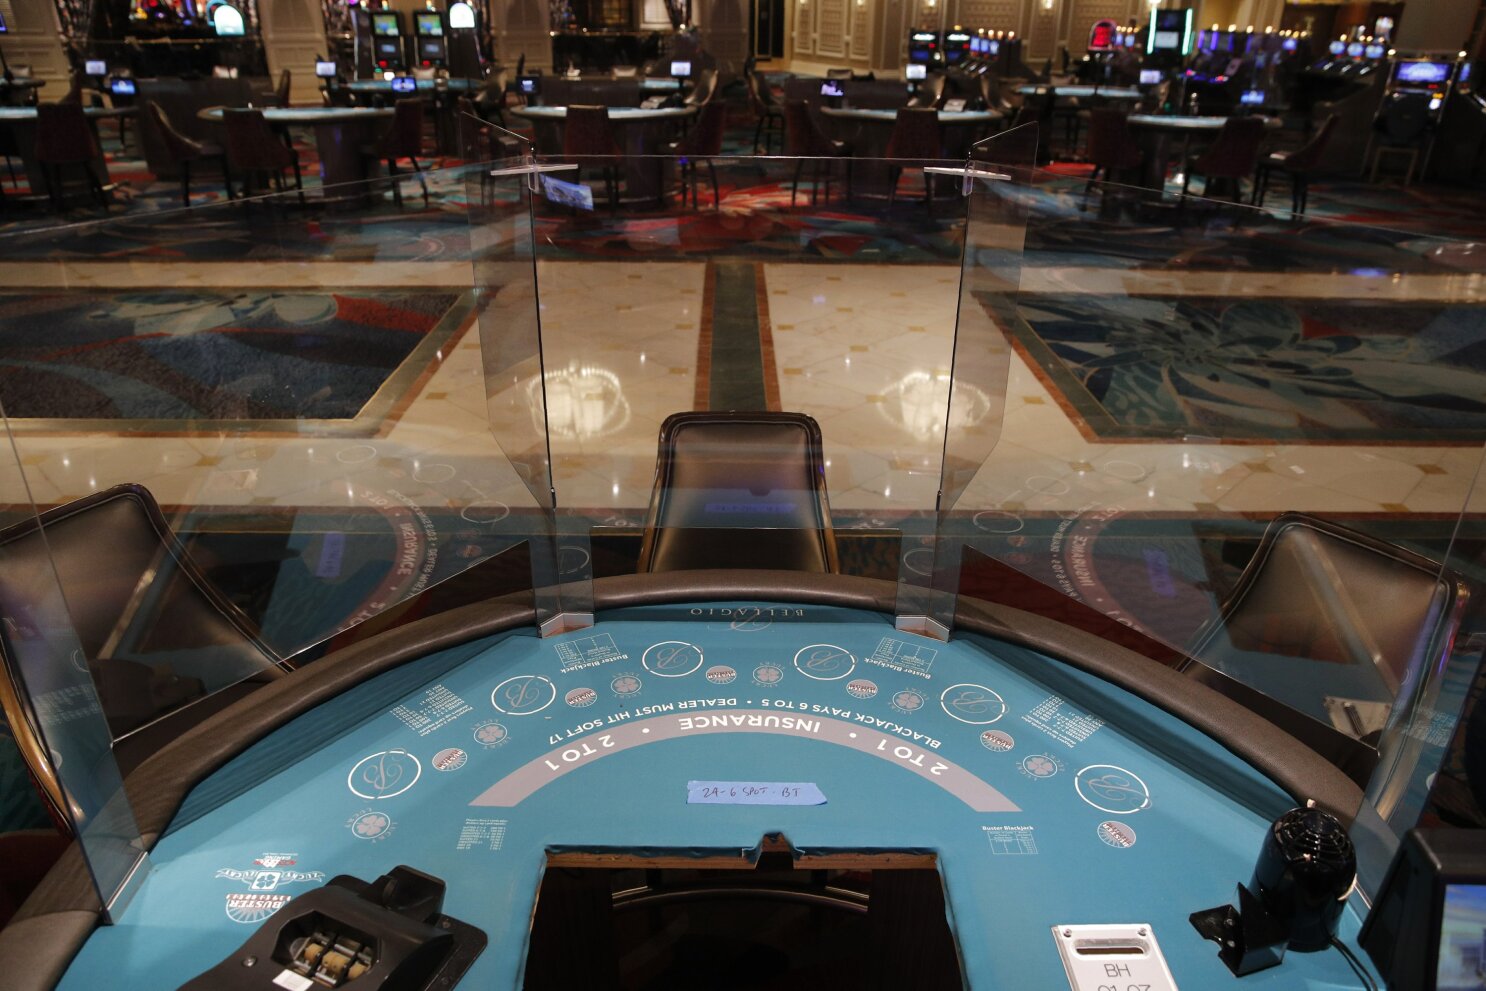 Caesars Palace in Las Vegas prepares for reopening with measures